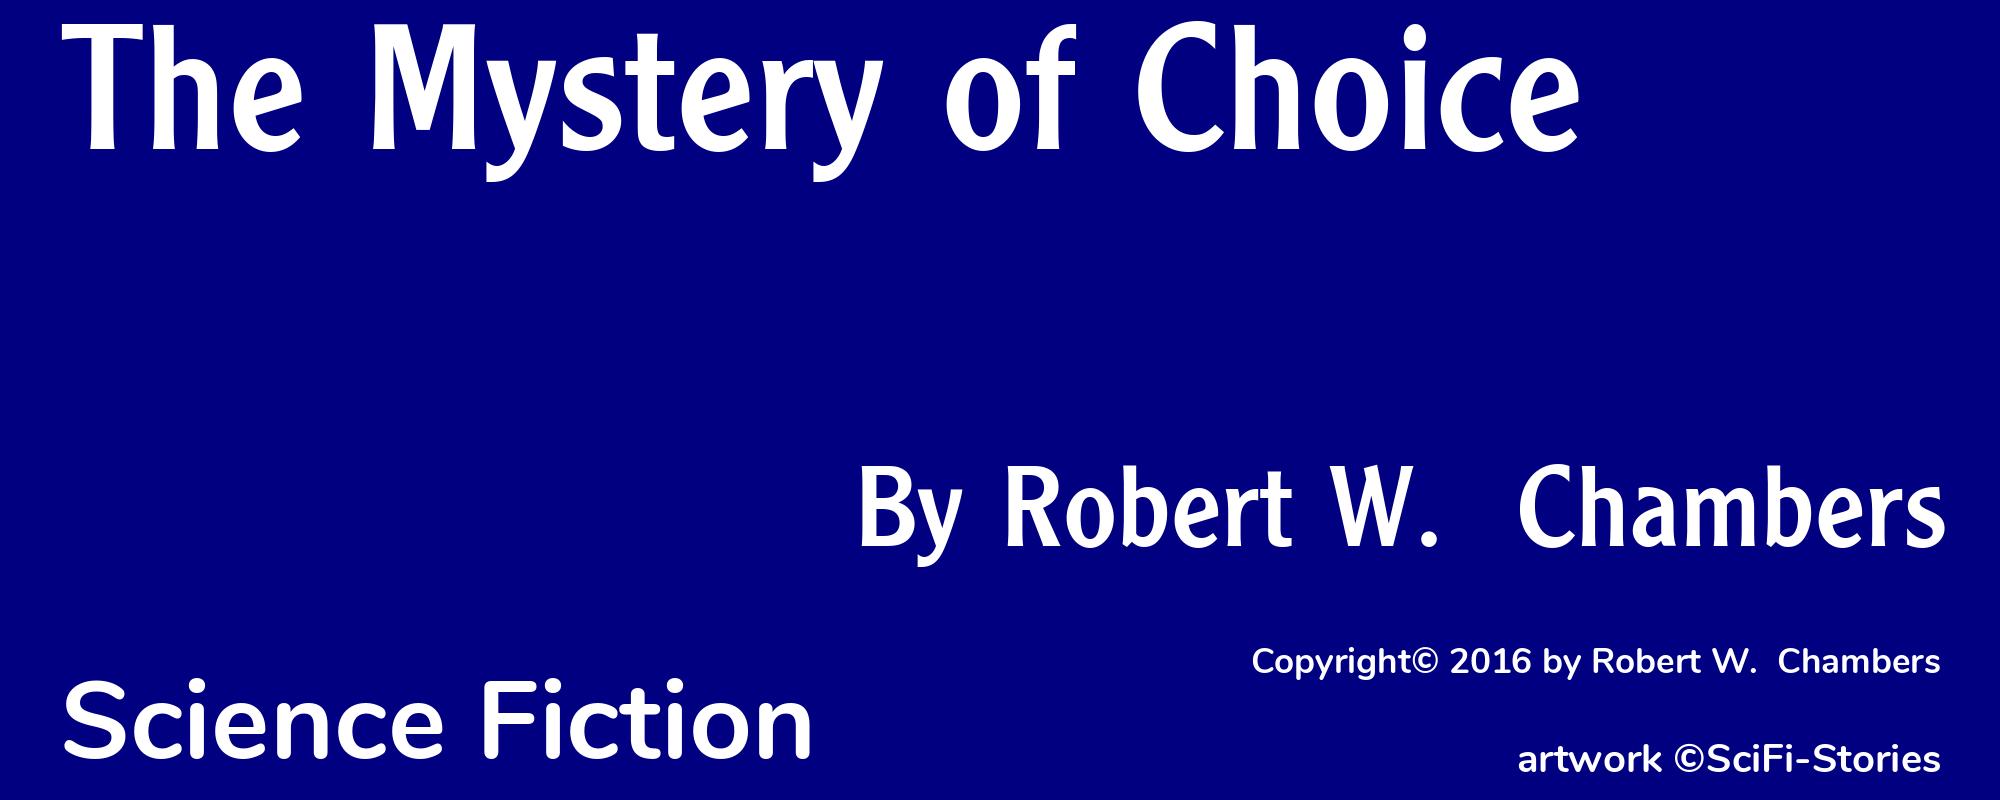 The Mystery of Choice - Cover